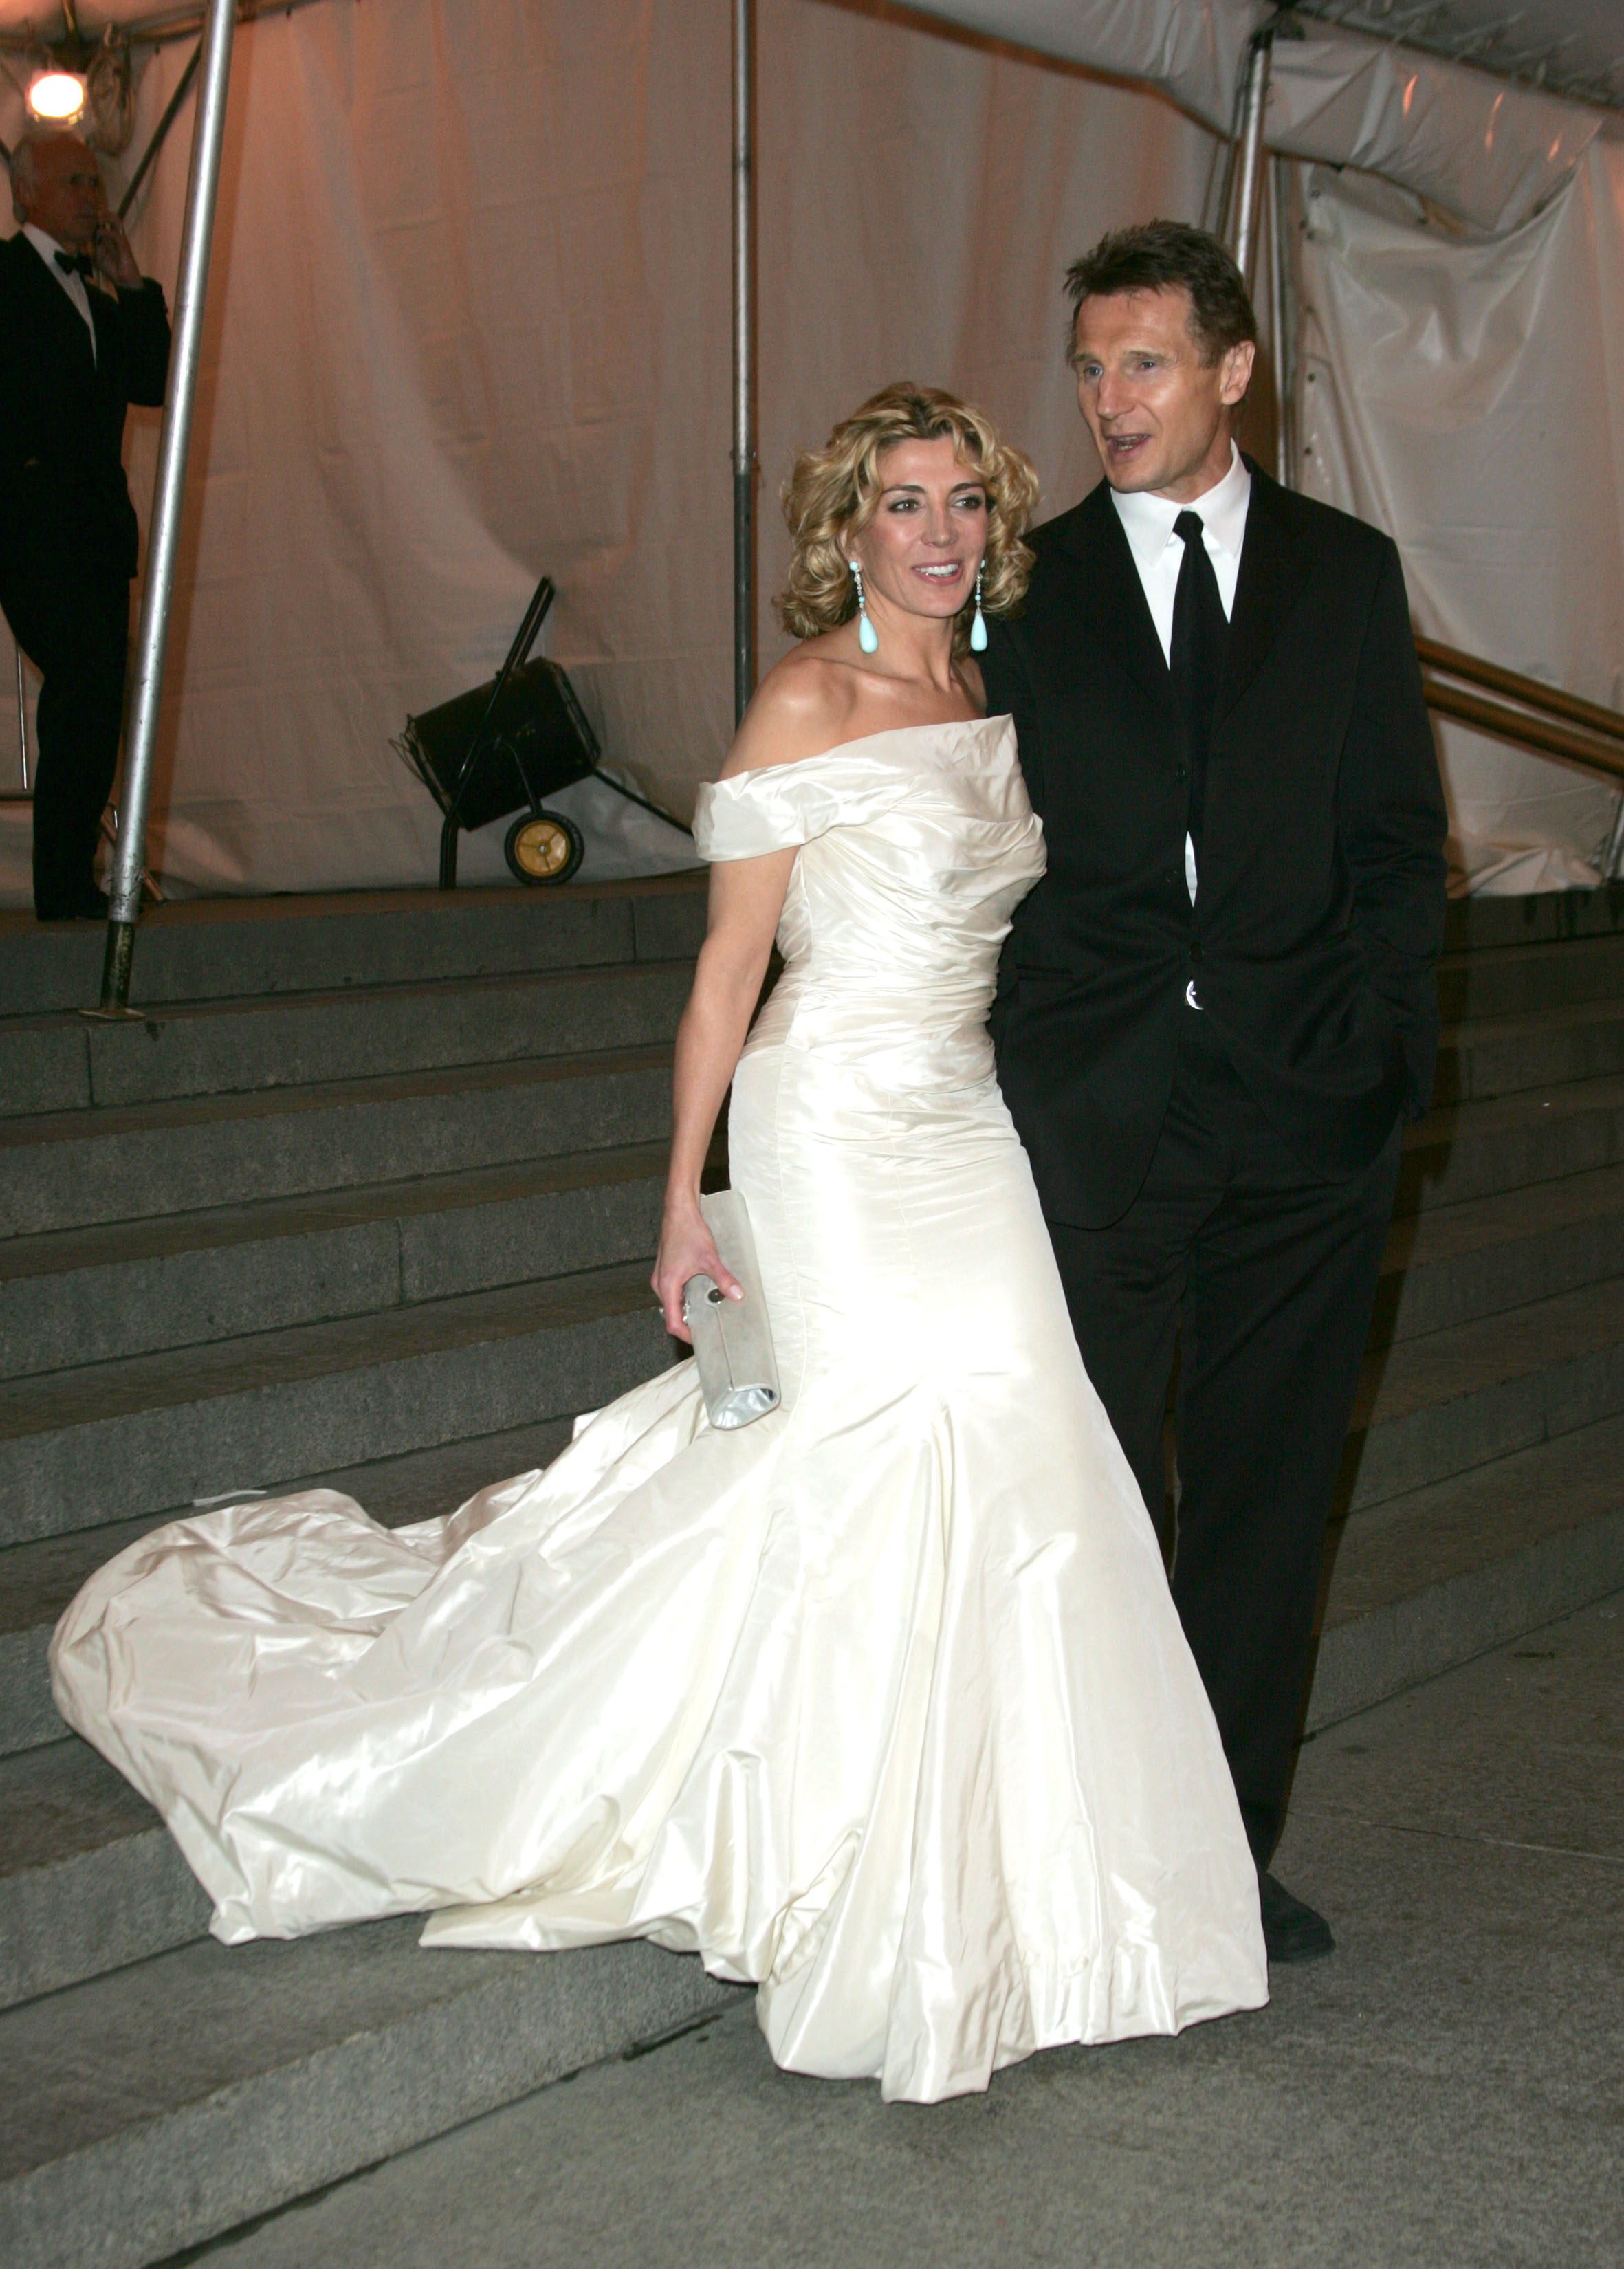 Natasha Richardson and Liam Neeson during Chanel Costume Institute Gala at The Metropolitan Museum of Art - Departures in New York City on May 2, 2005 | Source: Getty Images